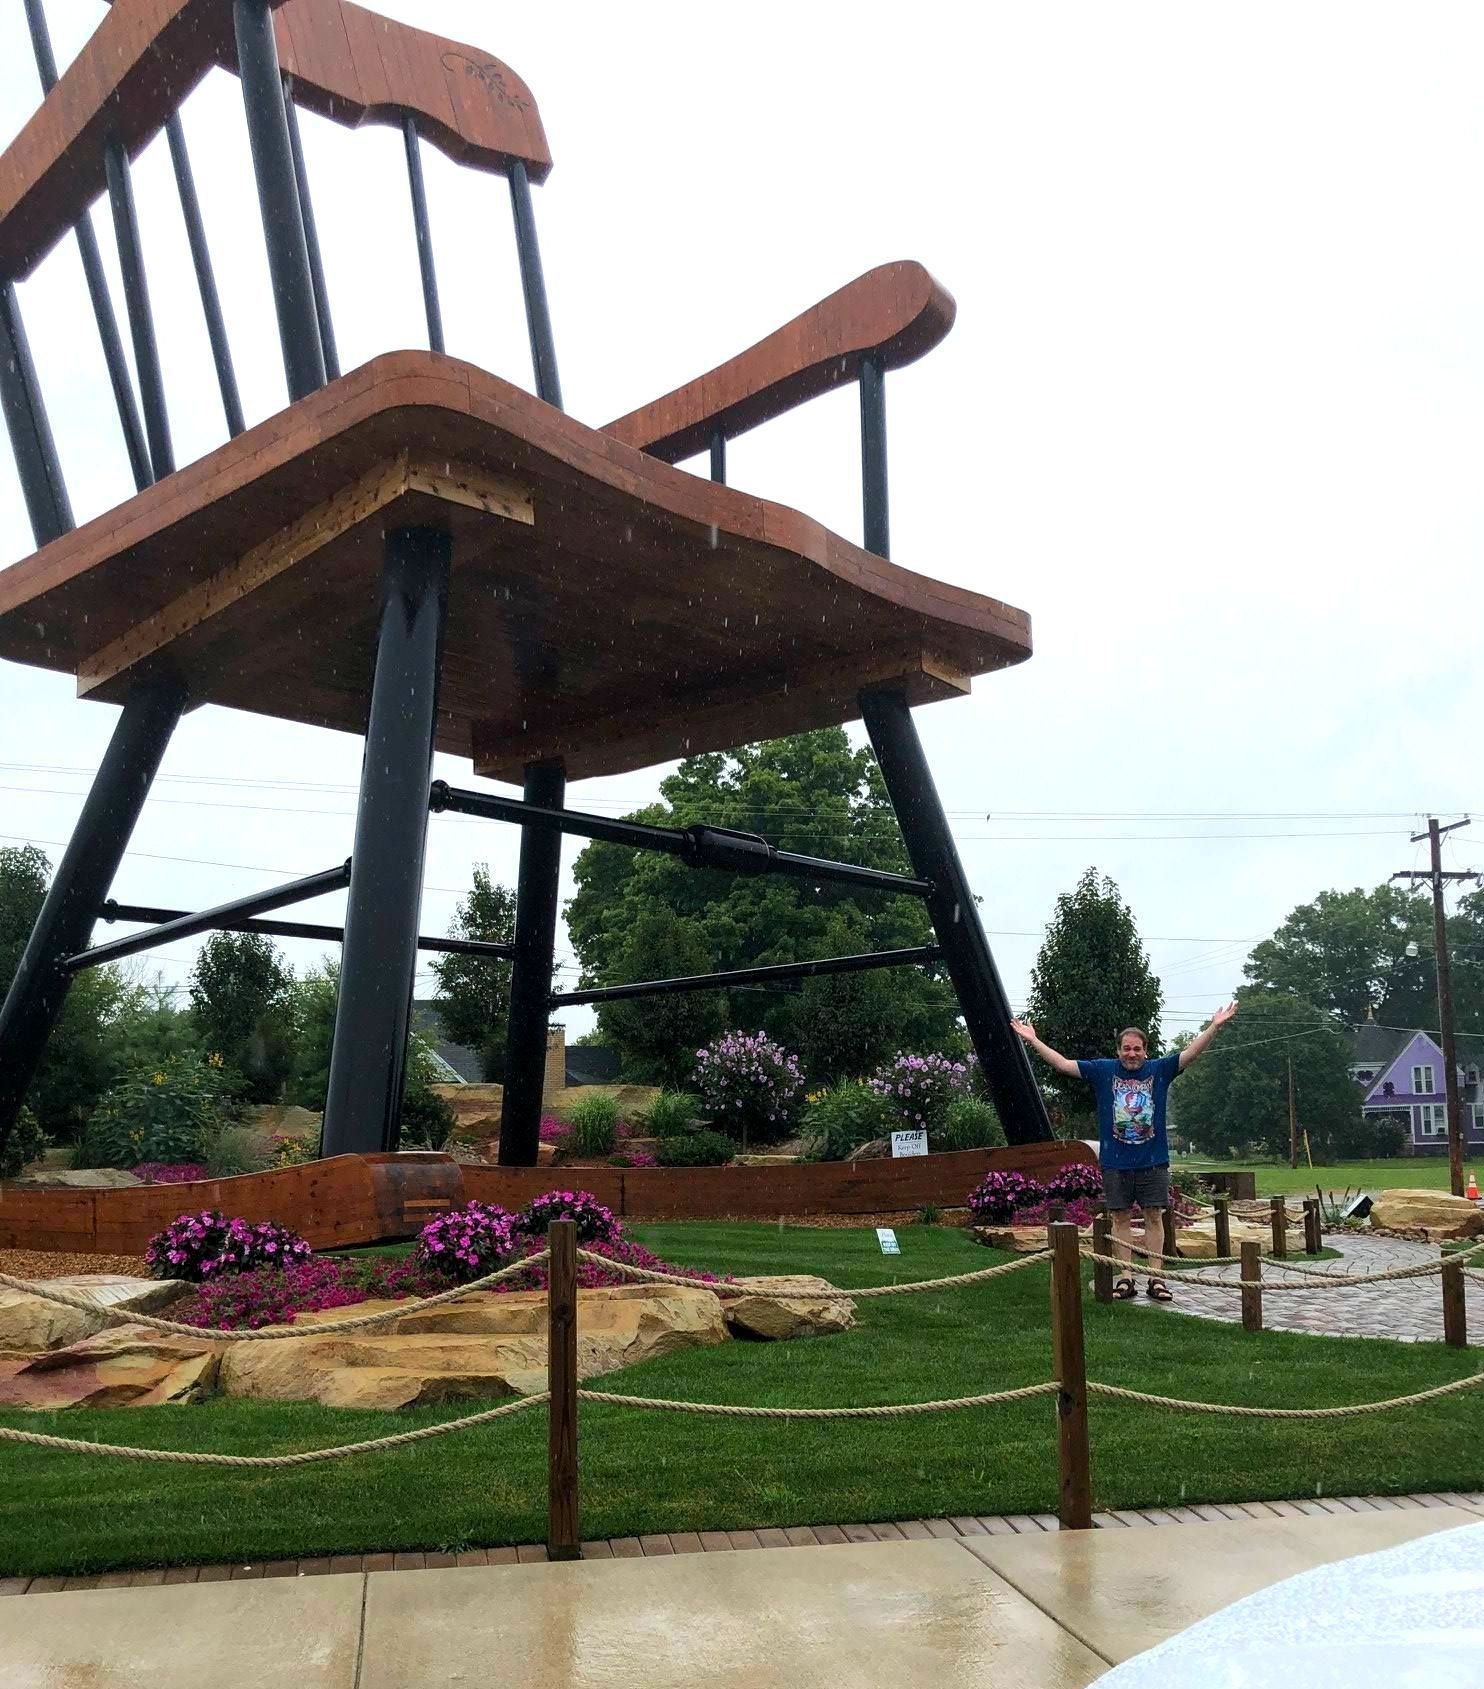 World's Largest Rocking Chair, world record in Casey, Illinois